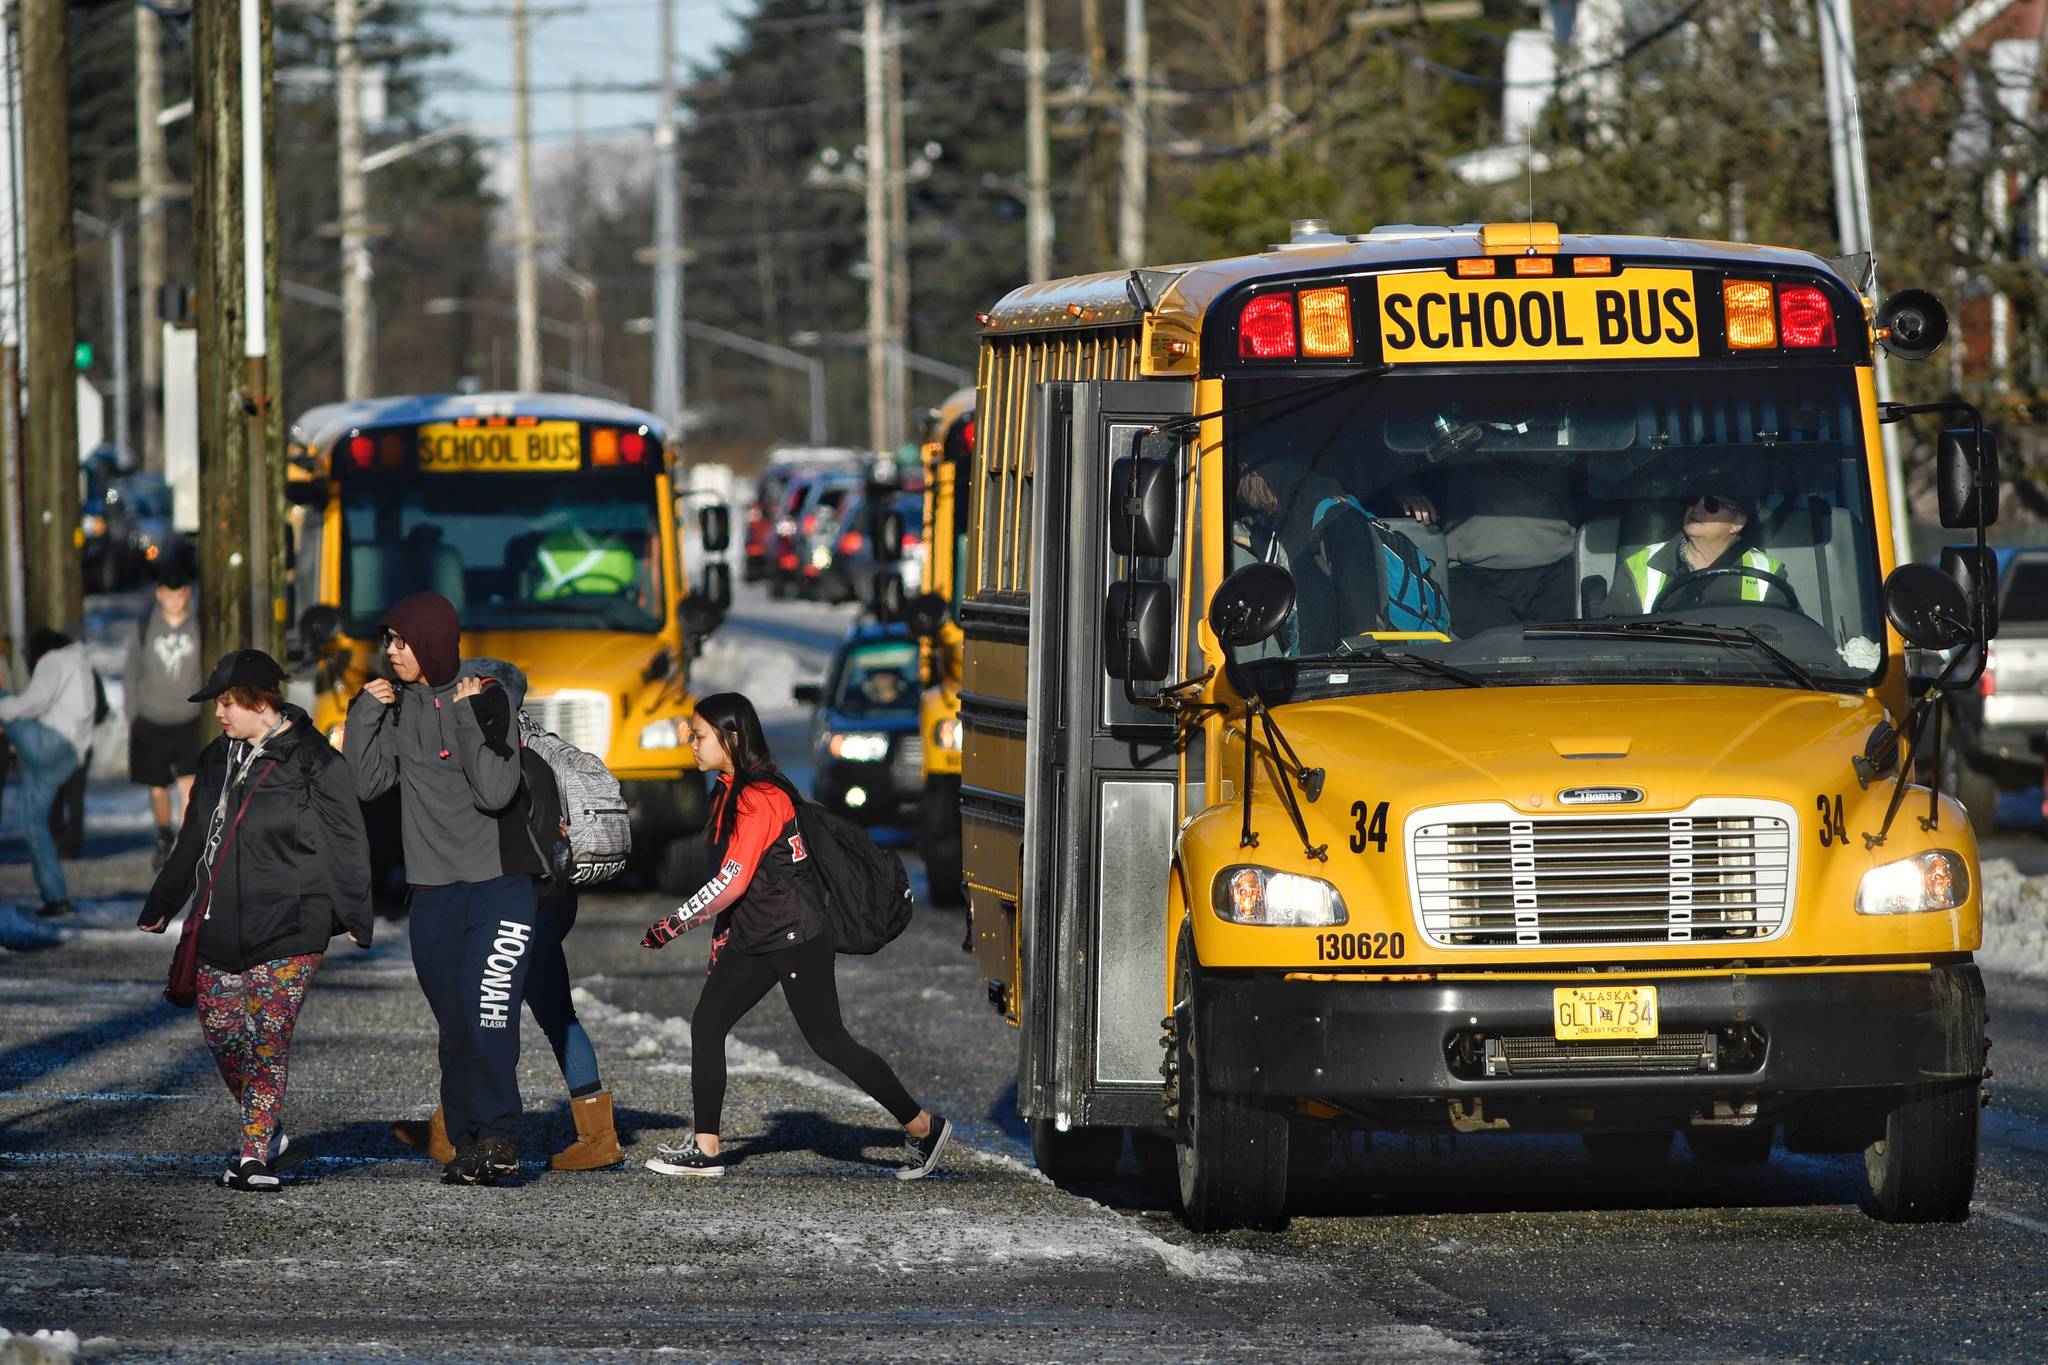 Buses deliver students to Juneau-Douglas High School: Yadaa.at Kalé on Wednesday, Feb. 19, 2019. The Juneau School District is facing cuts to next year’s budget that may lead to the layoffs of over 100 teachers. (Michael Penn | Juneau Empire)